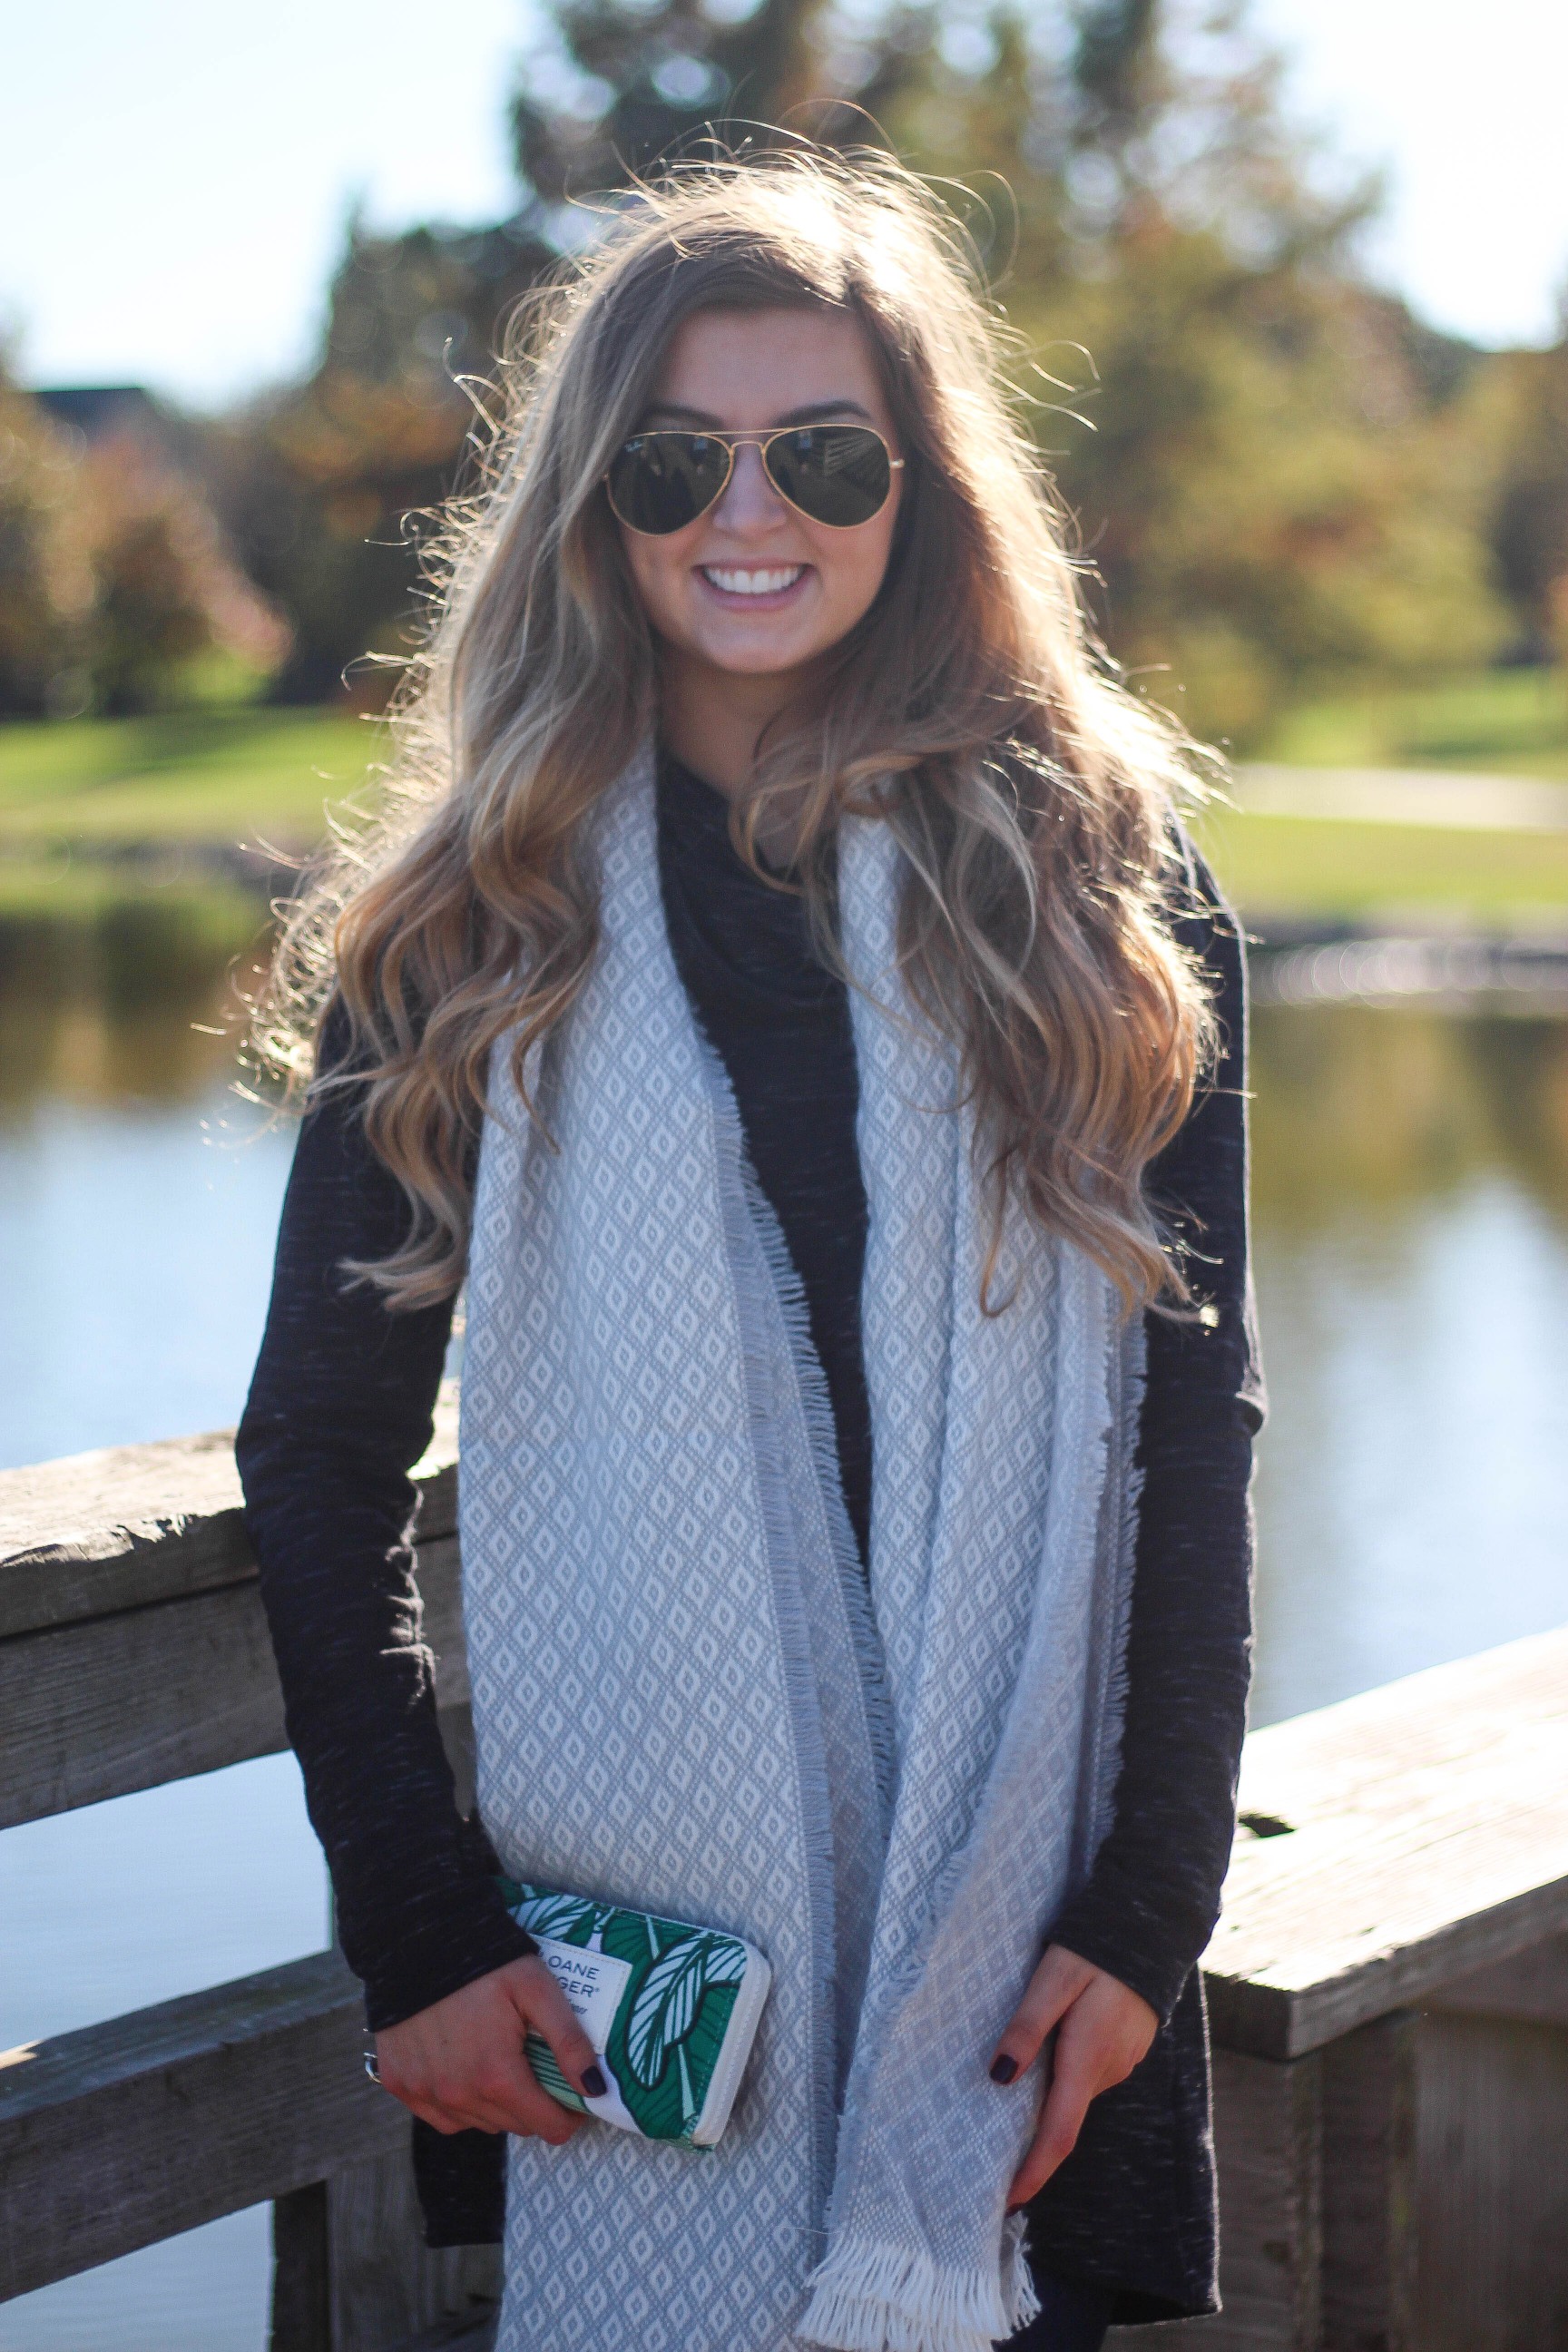 cute winter outfit - sweater tunic with blanket scarf - By Lauren M